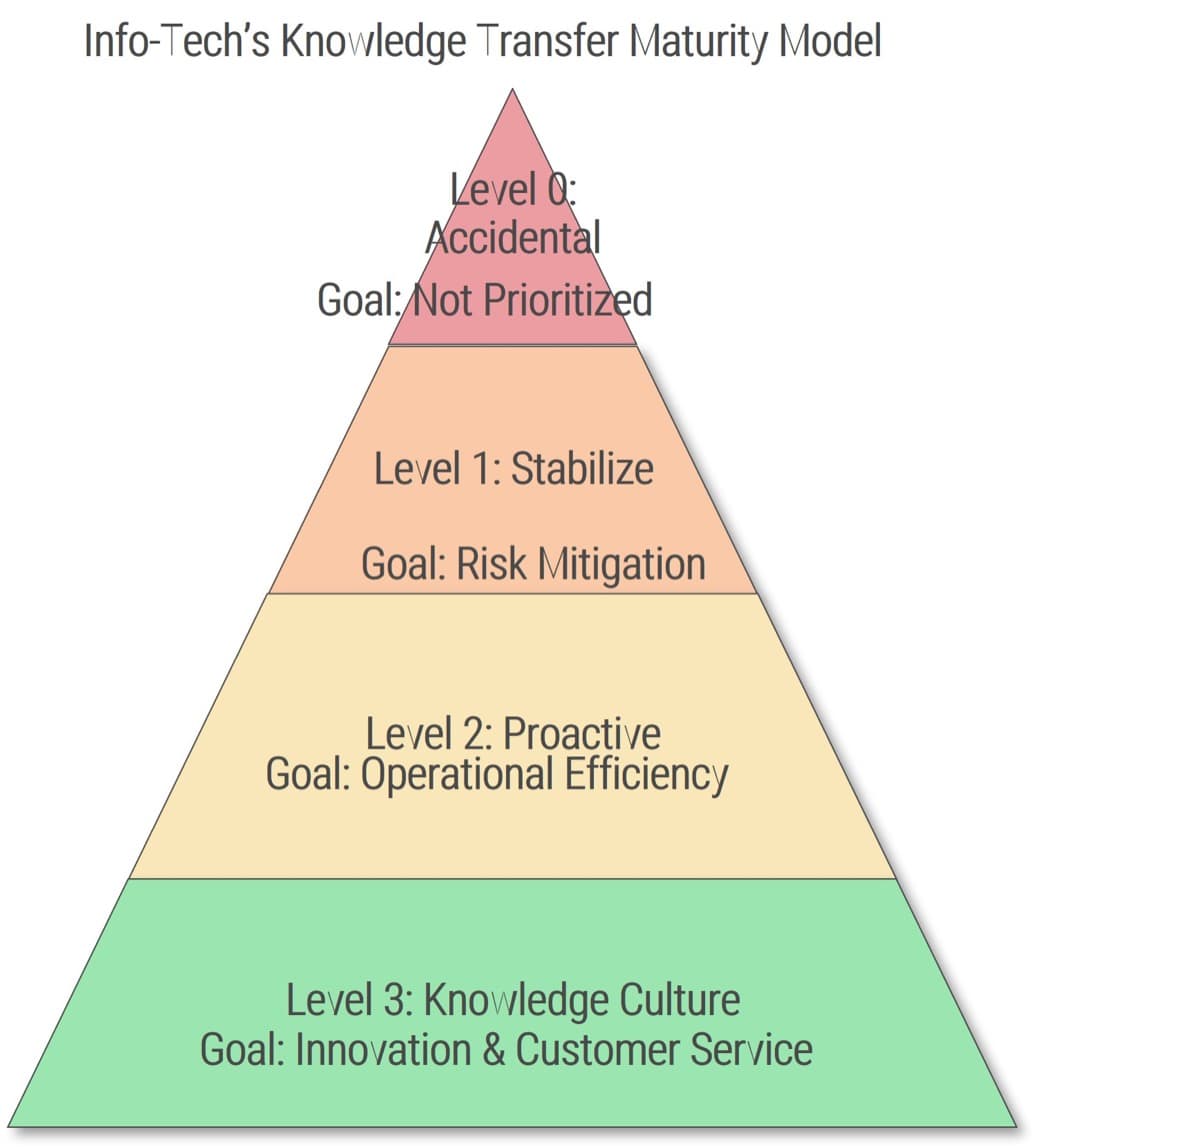 The image contains a picture of Info-Tech's Knowledge Transfer Maturity Model. Level 0: Accidental, goal is not prioritized. Level 1: Stabilize, goal is risk mitigation. Level 2: Proactive, goal is operational efficiency. Level 3: Knowledge Culture, goal is innovation & customer service.